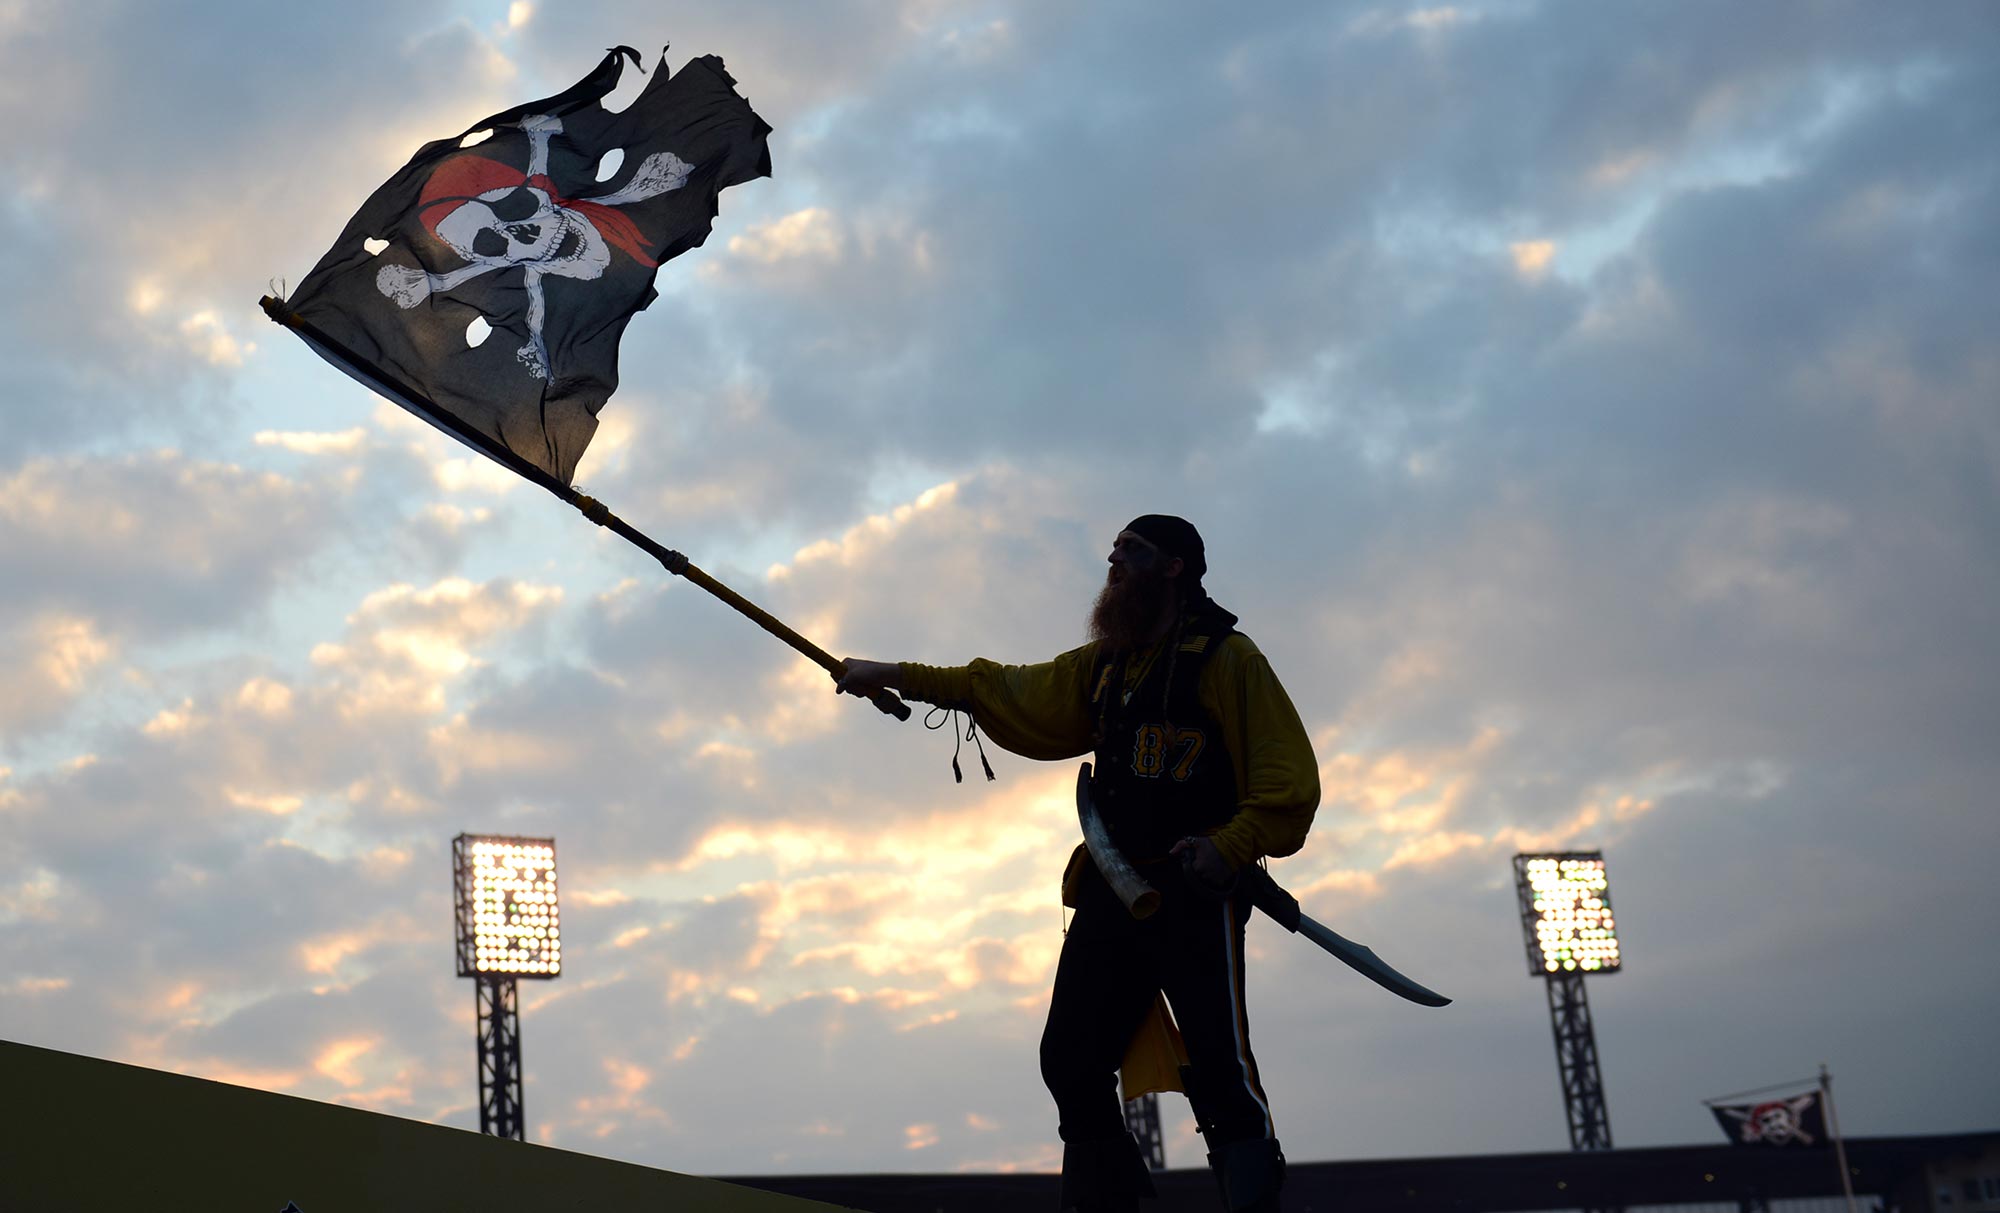 Louis Lambros "Bucco Louie" of Mt. Lebanon cheers for the Pirates from his perch on the Clemente Bridge before the start of the National League wild card on the North Side. (Julia Rendleman/Post-Gazette)